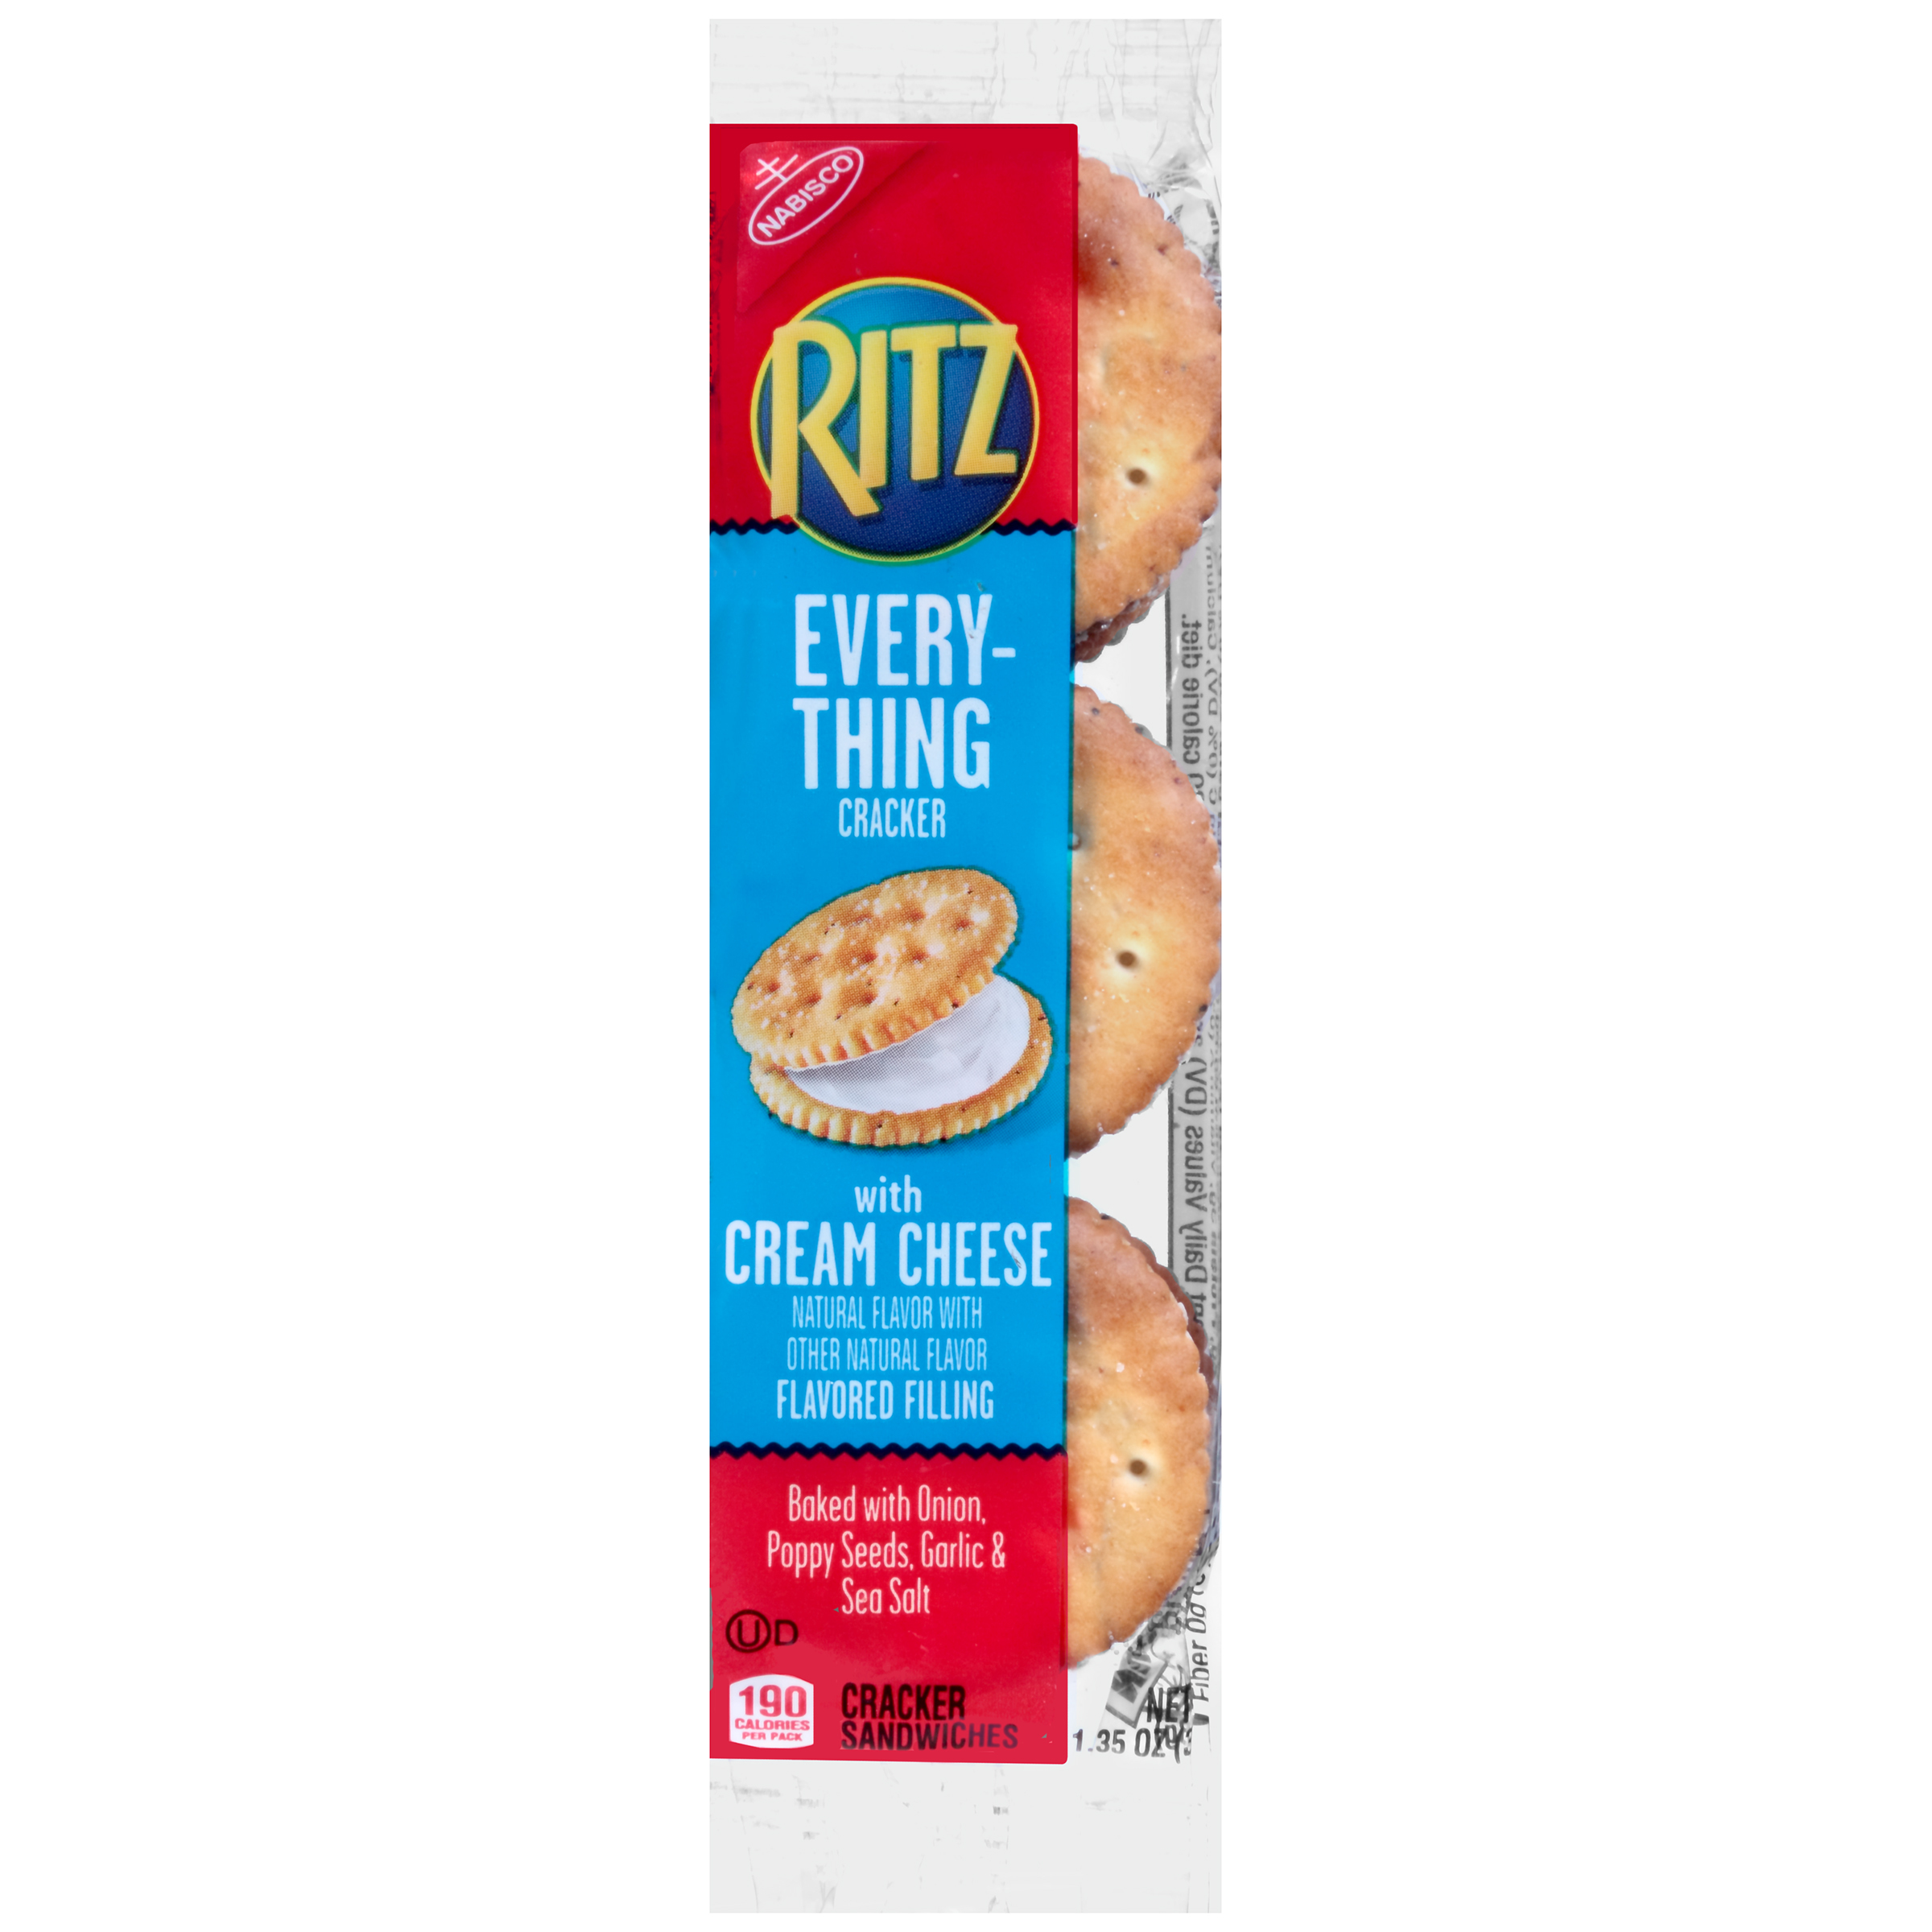 RITZ CRACKERS Everything with Cream Cheese 14x8 1.38 8CT